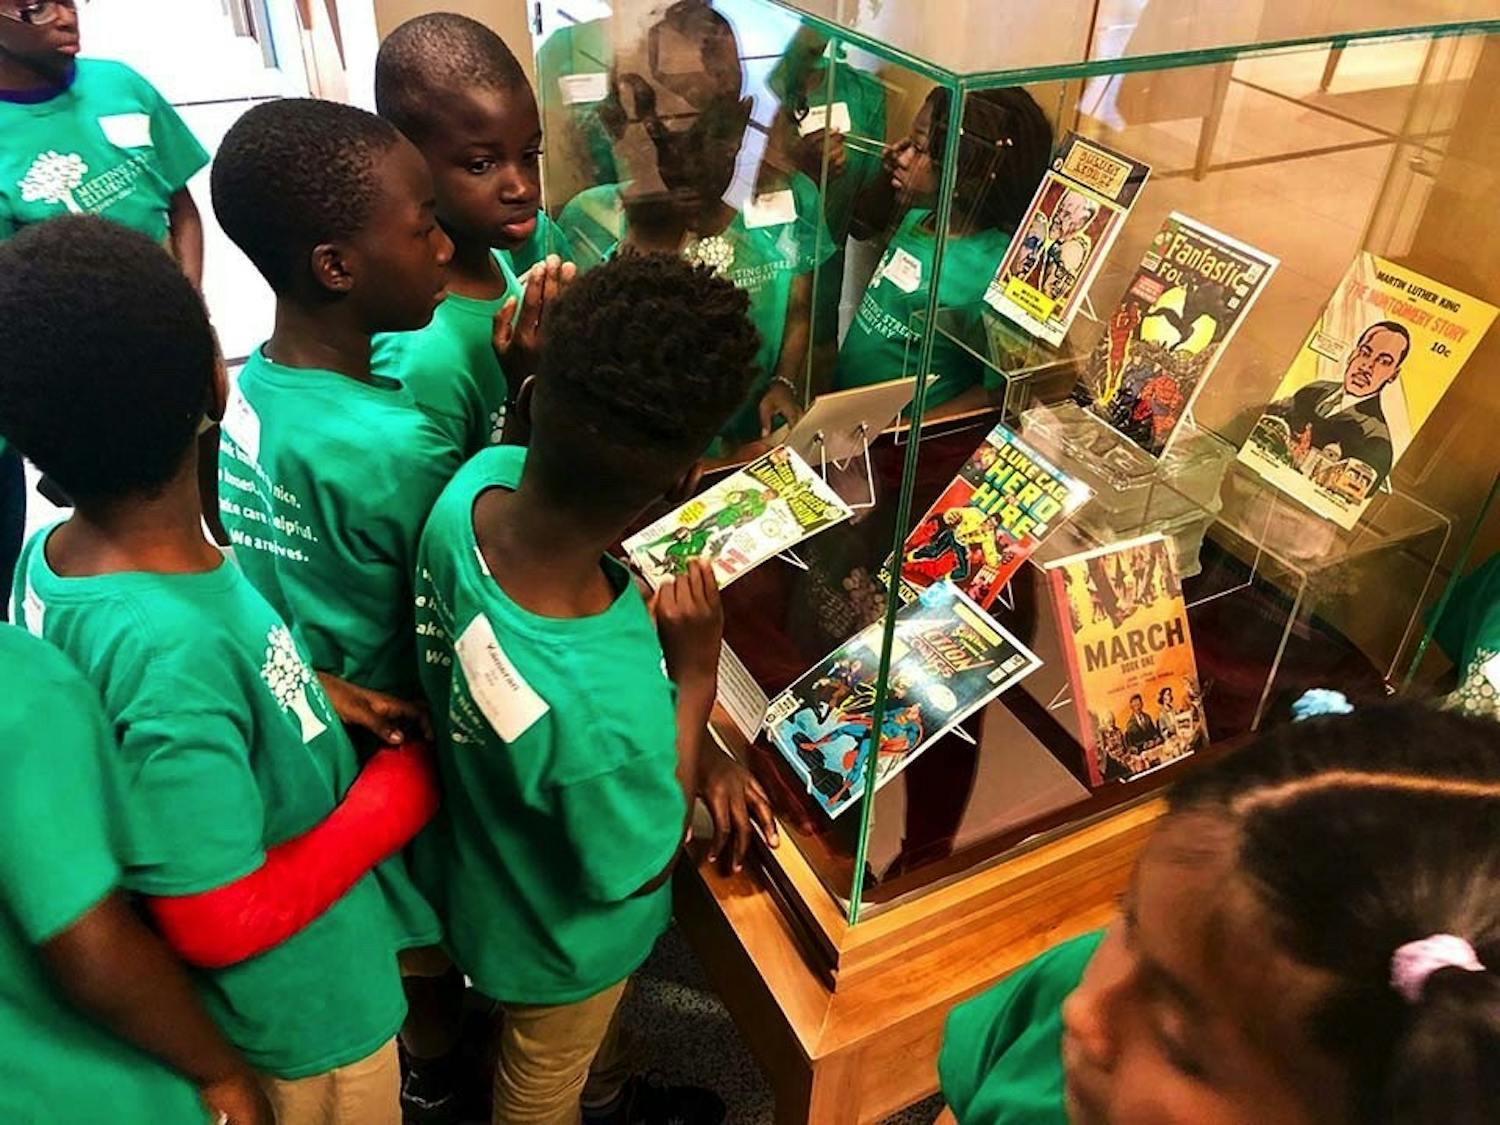 A group of students huddled around a case of books in the Center for Civil Rights History and Research “Justice For All” exhibit in 2019. The center collects and archives historic material and recently received funding from the National Parks Service to continue expanding its exhibits, which are found across multiple buildings on campus.